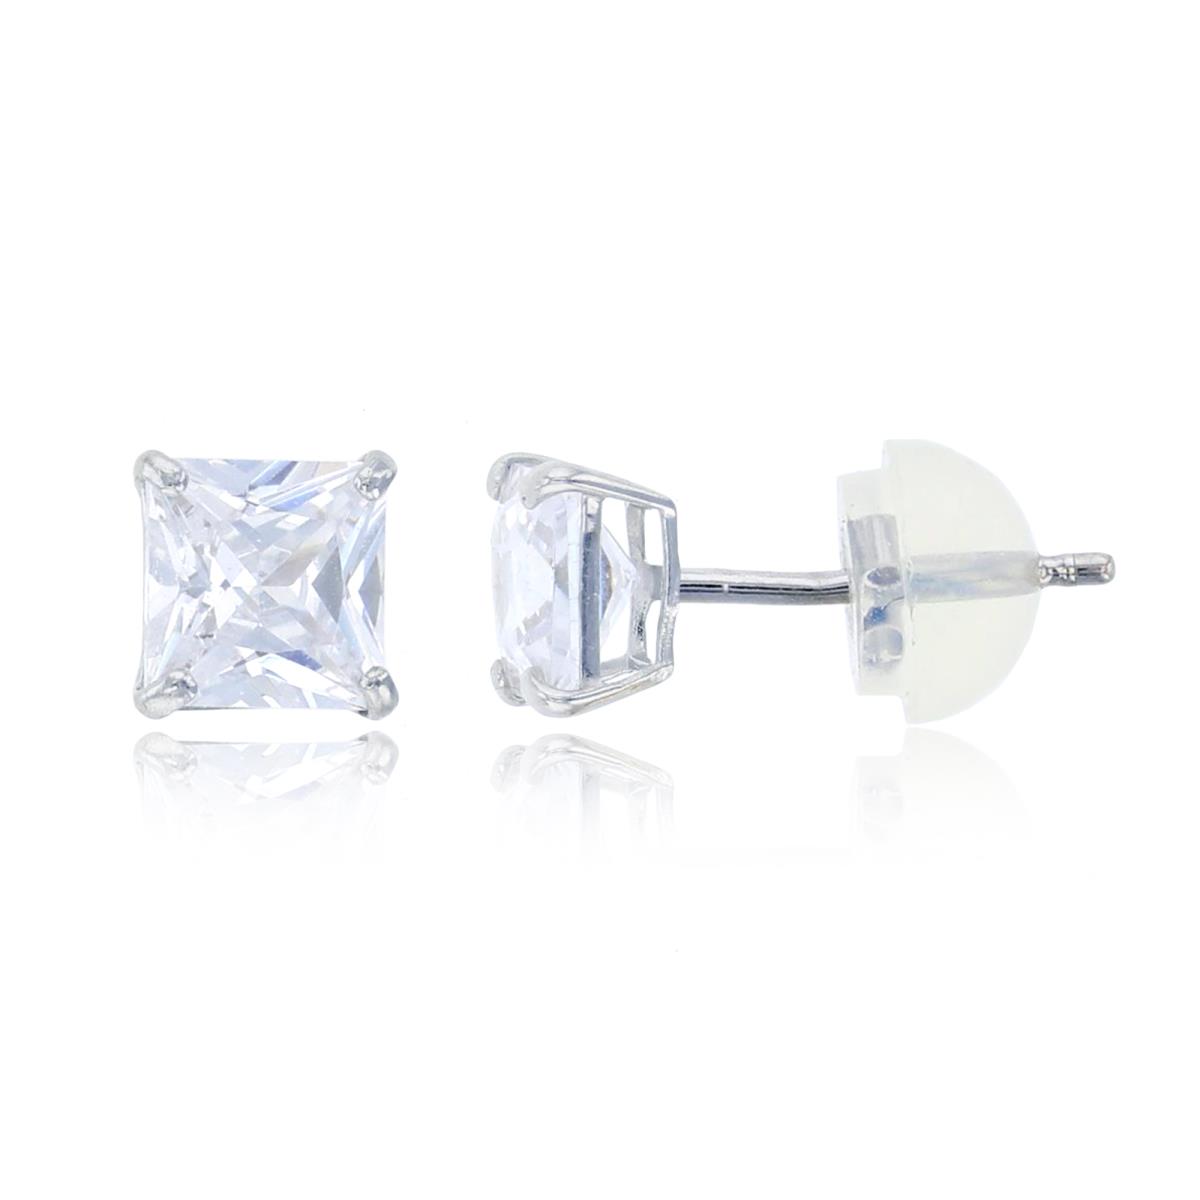 14K White Gold 5mm Princess Cut Solitaire Stud Earring